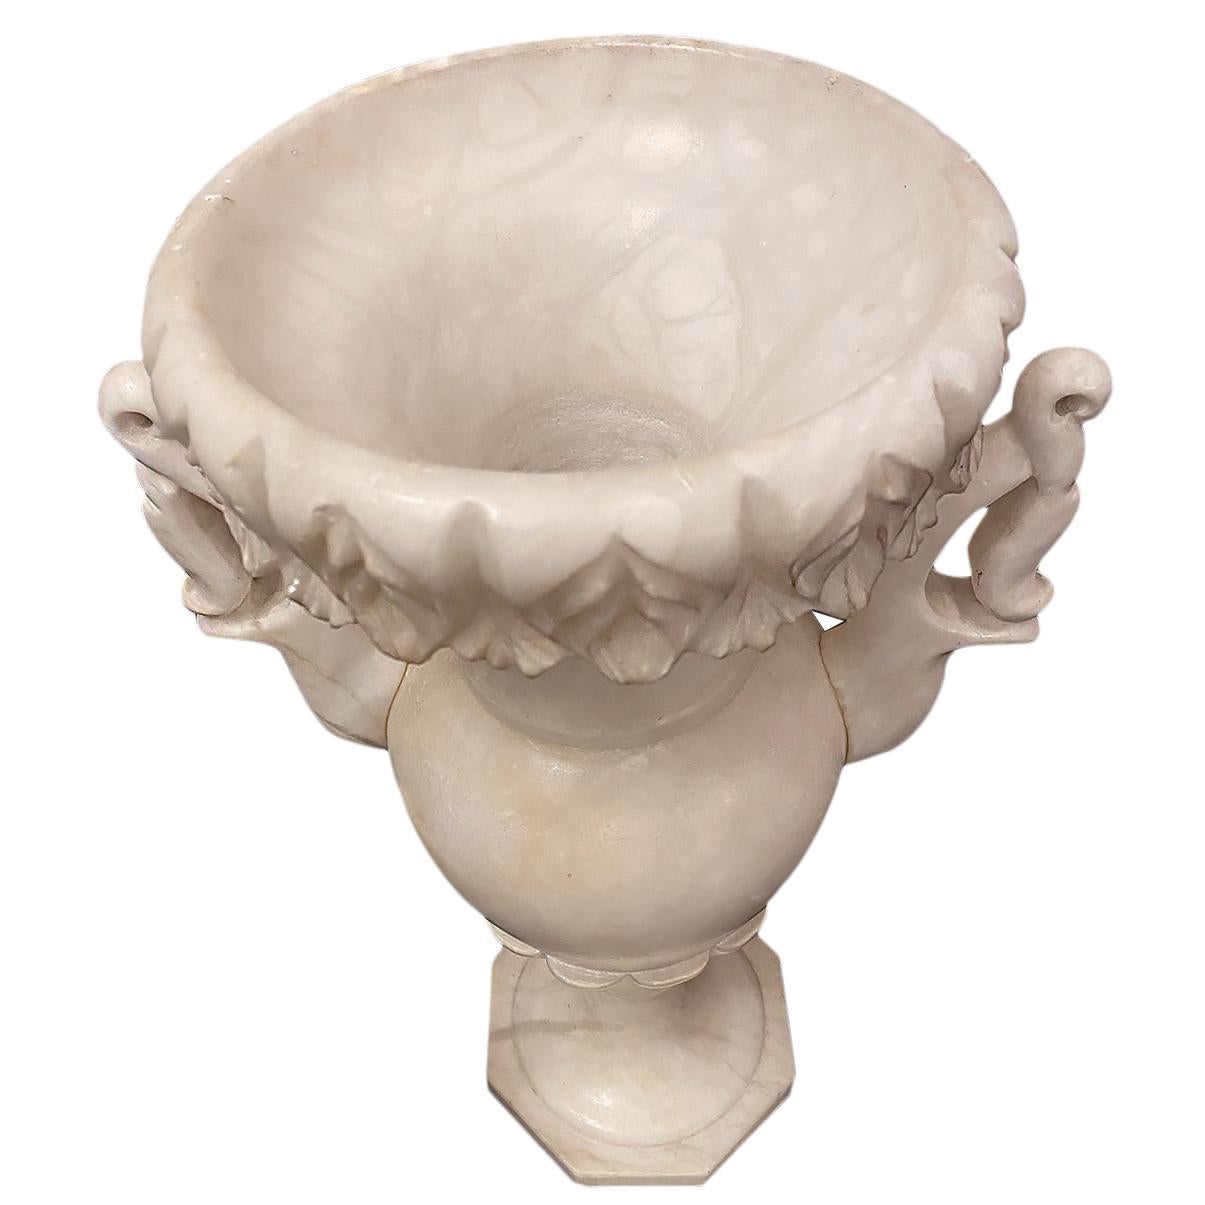 A single Italian circa 1930s carved alabaster table lamp in the form of an urn with interior light.

Measurements:
Height 18.5